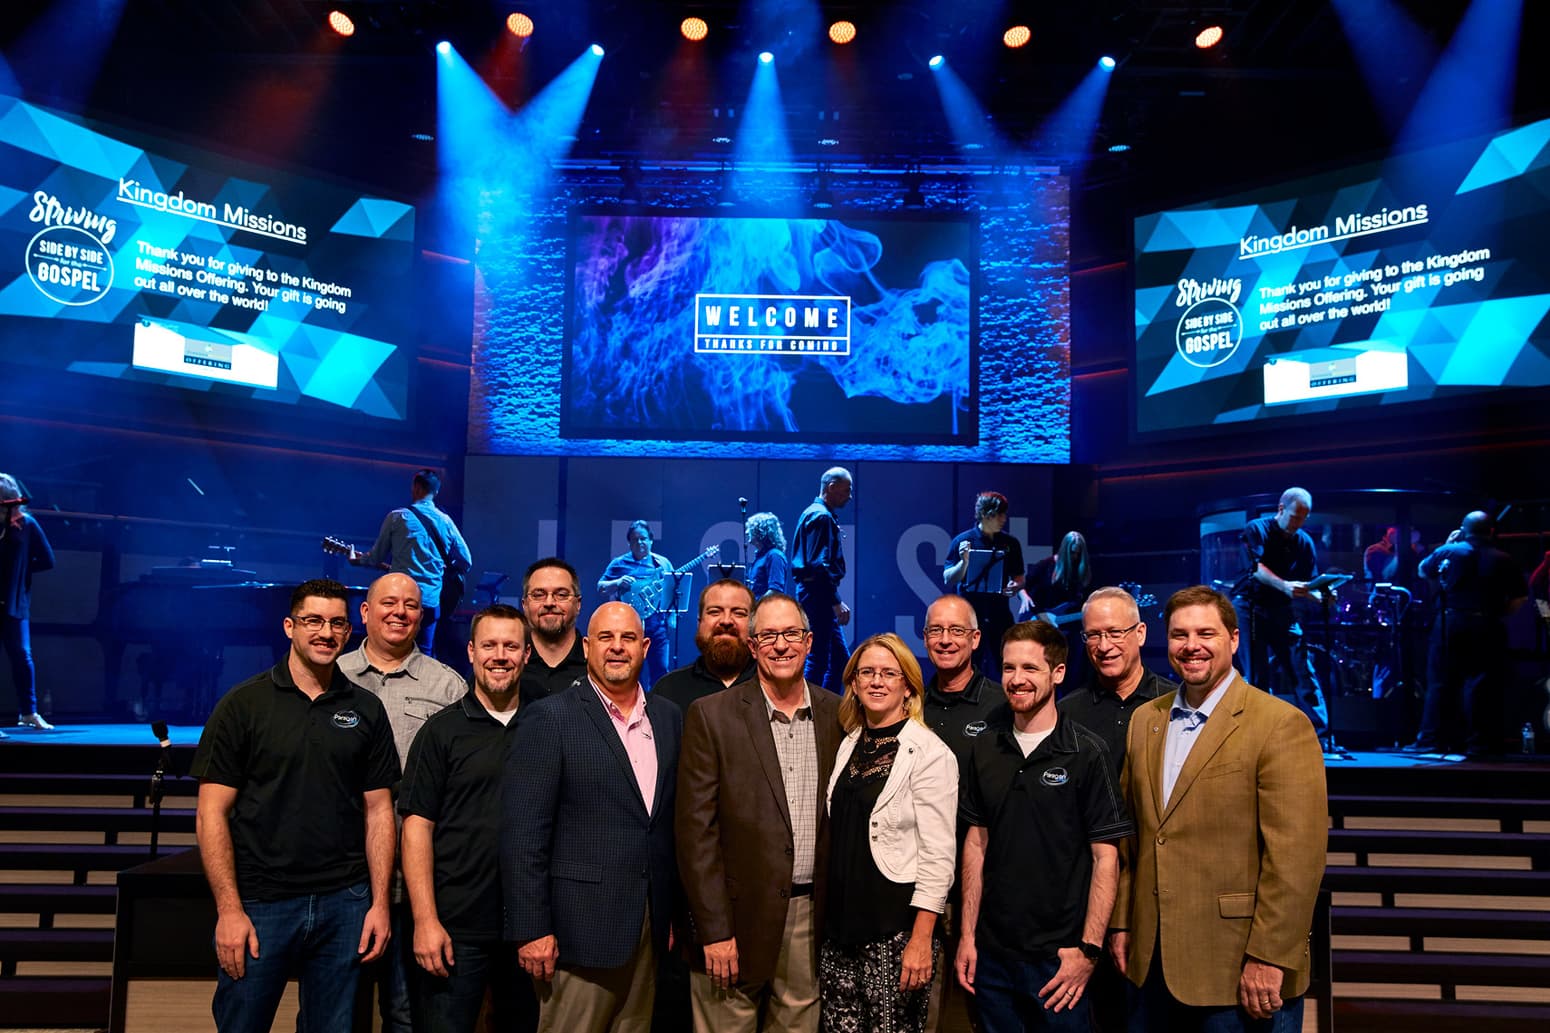 All involved with renovating the church sound systems at FBC were thrilled with the outcome.